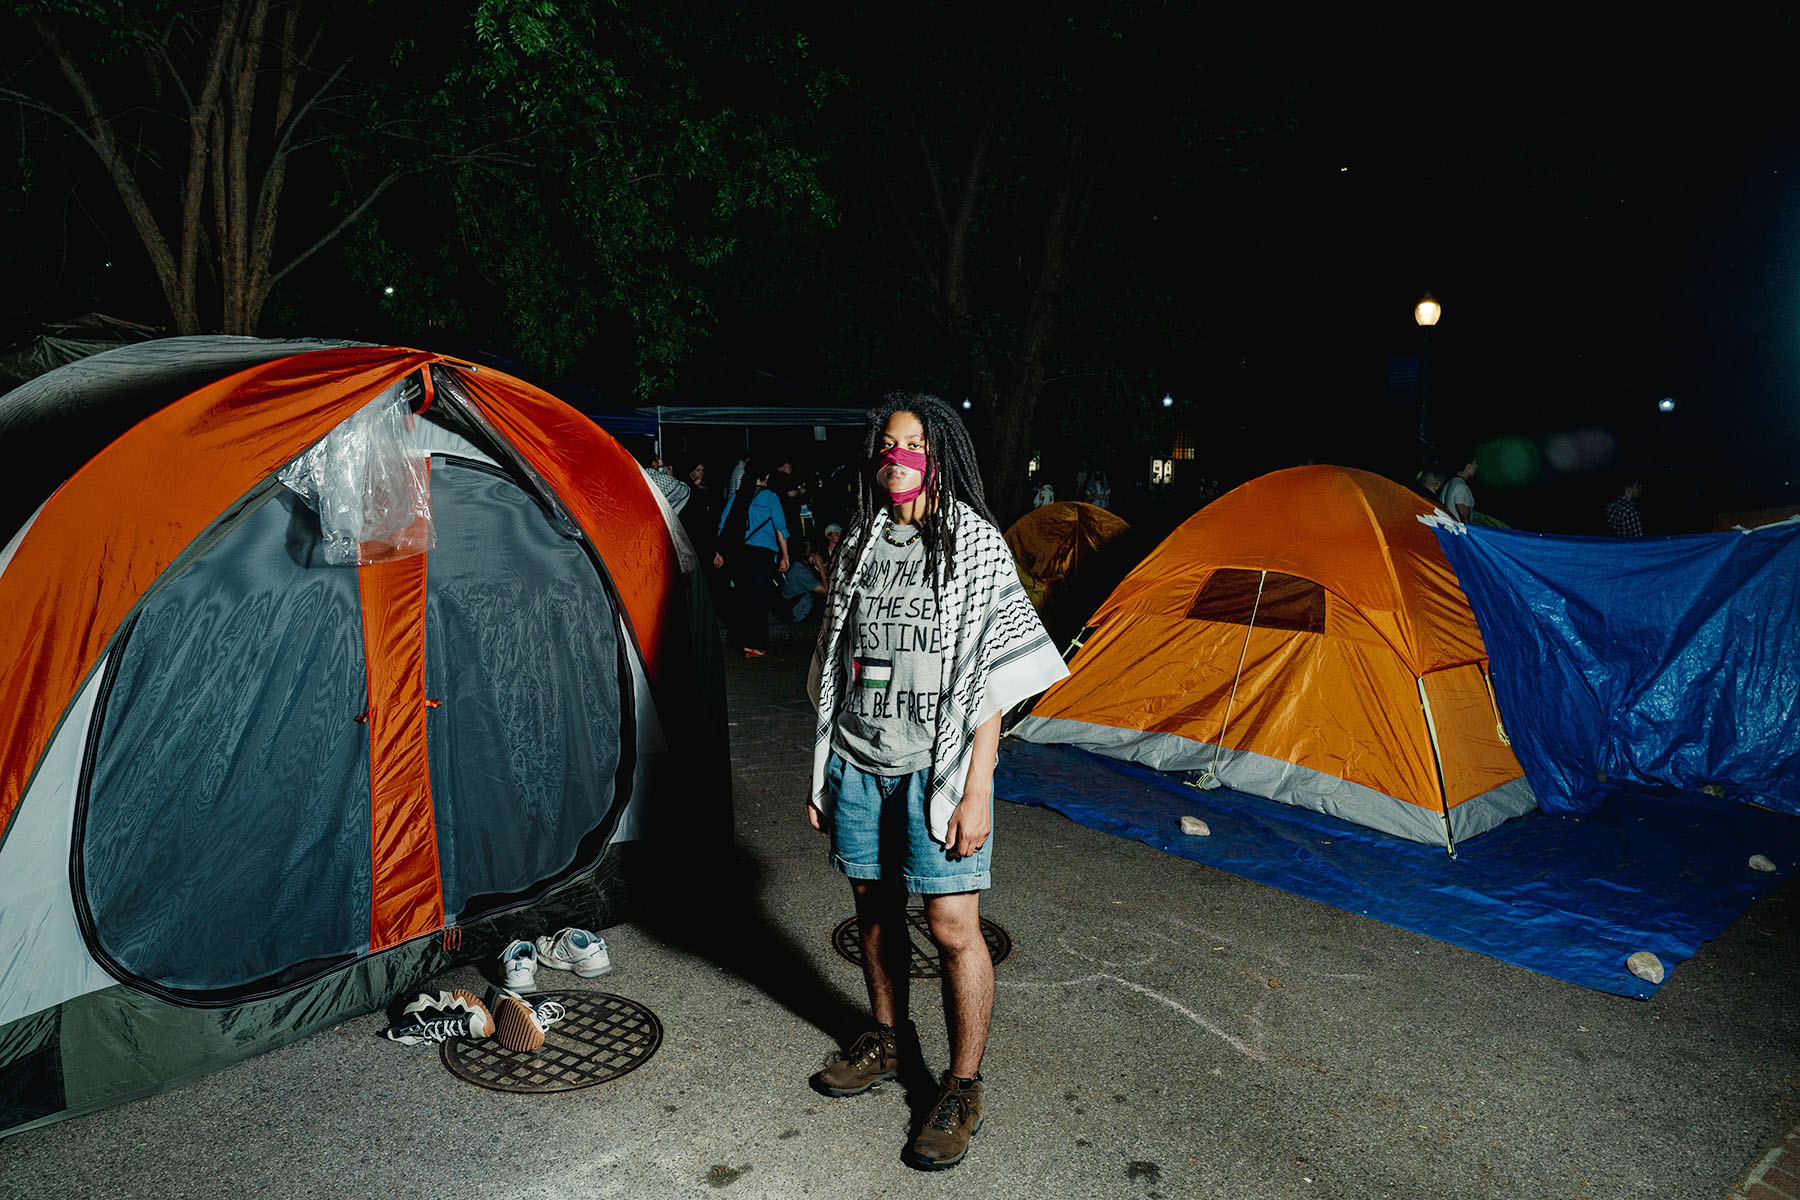 Bobbi-Angelica Morris poses for a portrait amidst tents at the George Washington University encampment. They are wearing a clear face mask, a keffiyeh is draped on their shoulders, and they are wearing a T-shirt with a Palestinian flag on it.